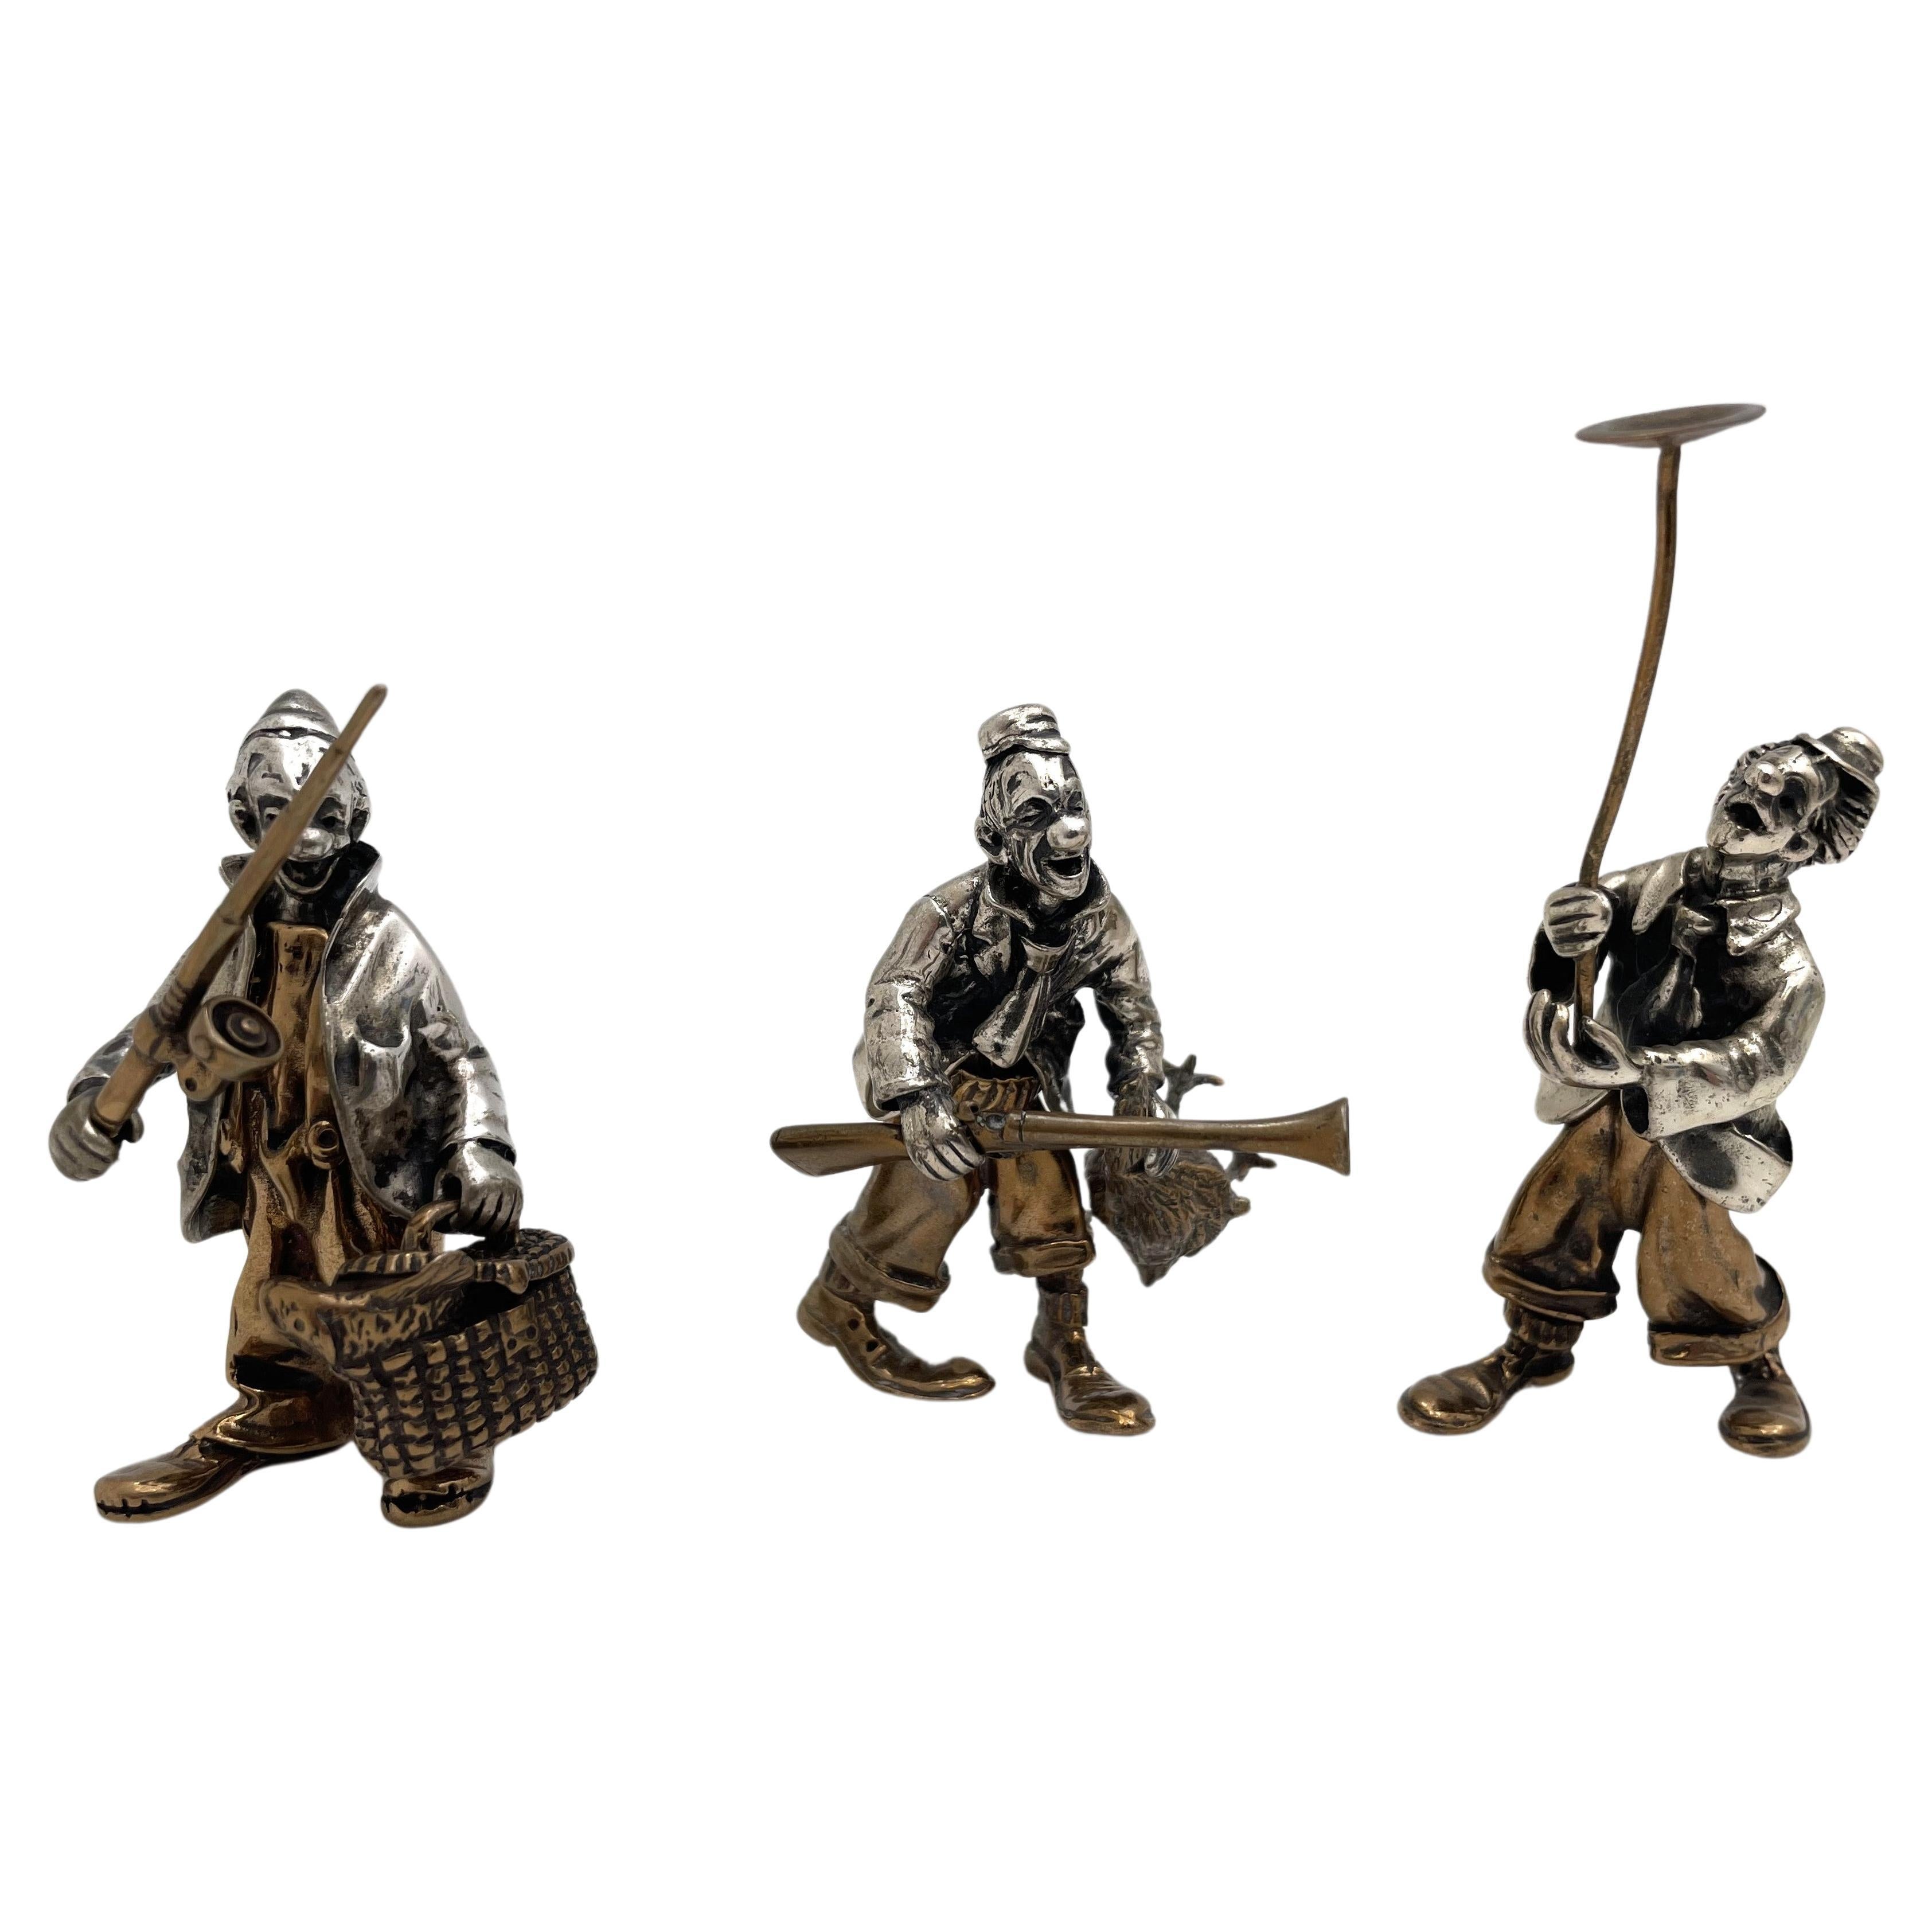 Italian Silver & Mixed Metal Set of 3 Realistic Circus Clowns Mid-20th Century For Sale